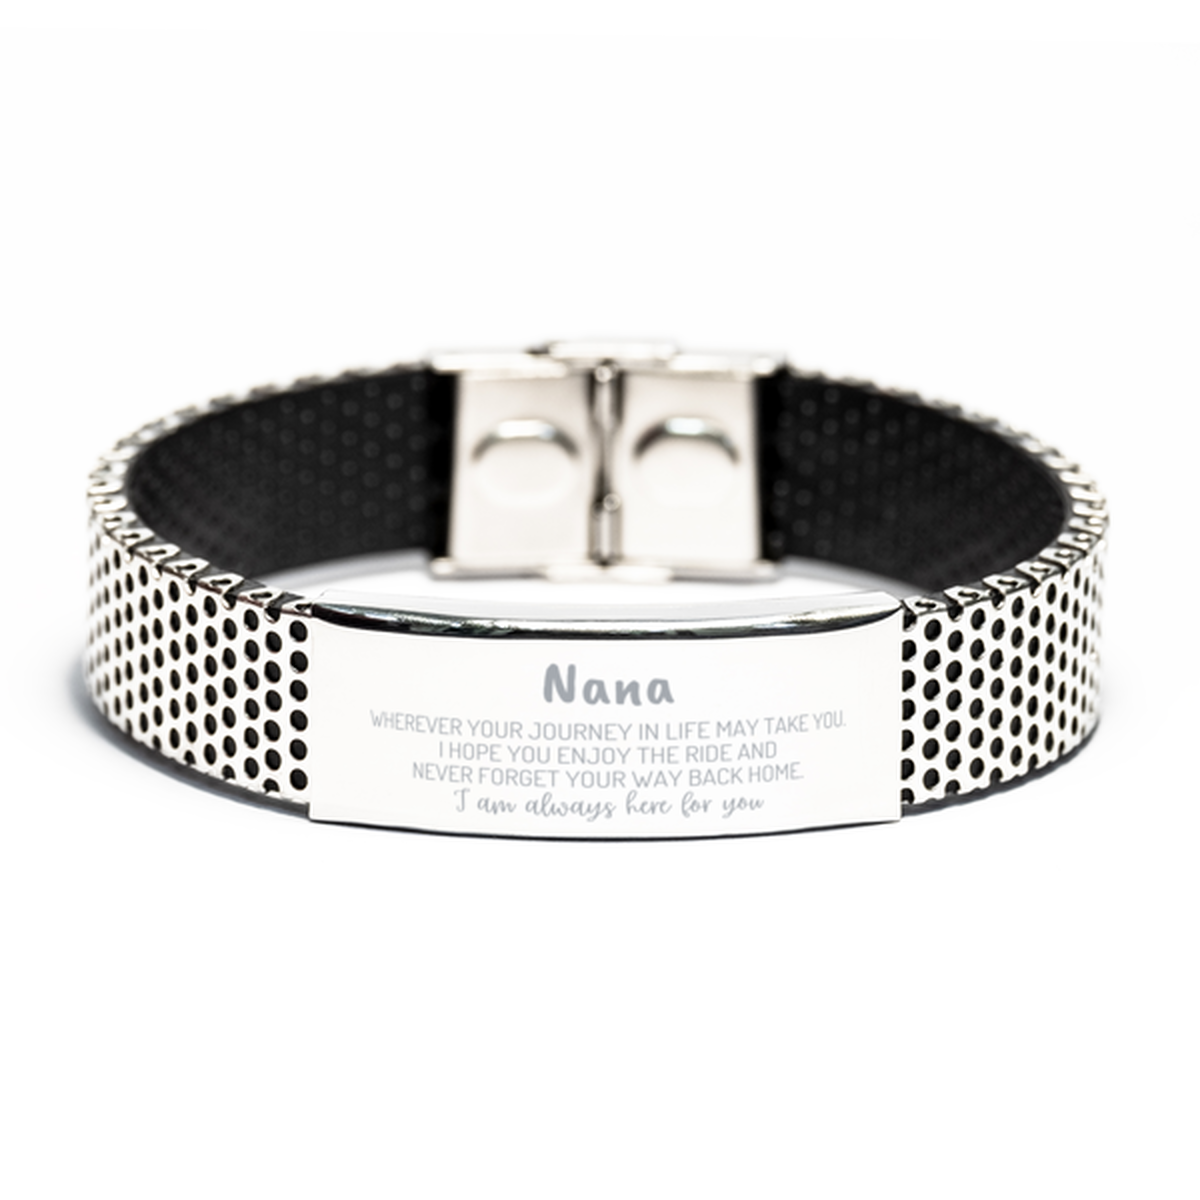 Nana wherever your journey in life may take you, I am always here for you Nana Stainless Steel Bracelet, Awesome Christmas Gifts For Nana, Nana Birthday Gifts for Men Women Family Loved One